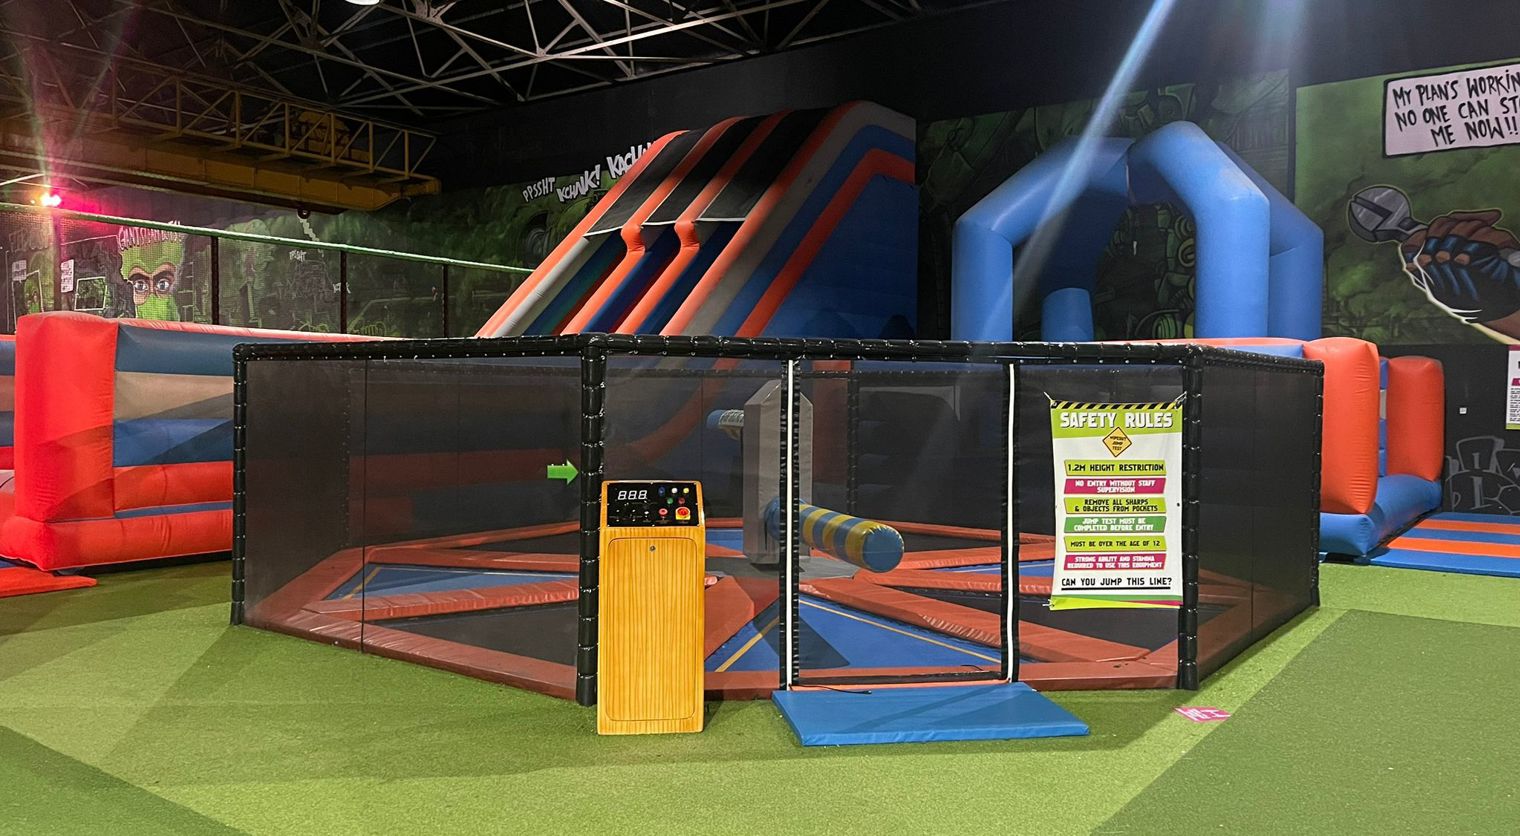 The Trampoline WipeOut arena at Flip Out UK